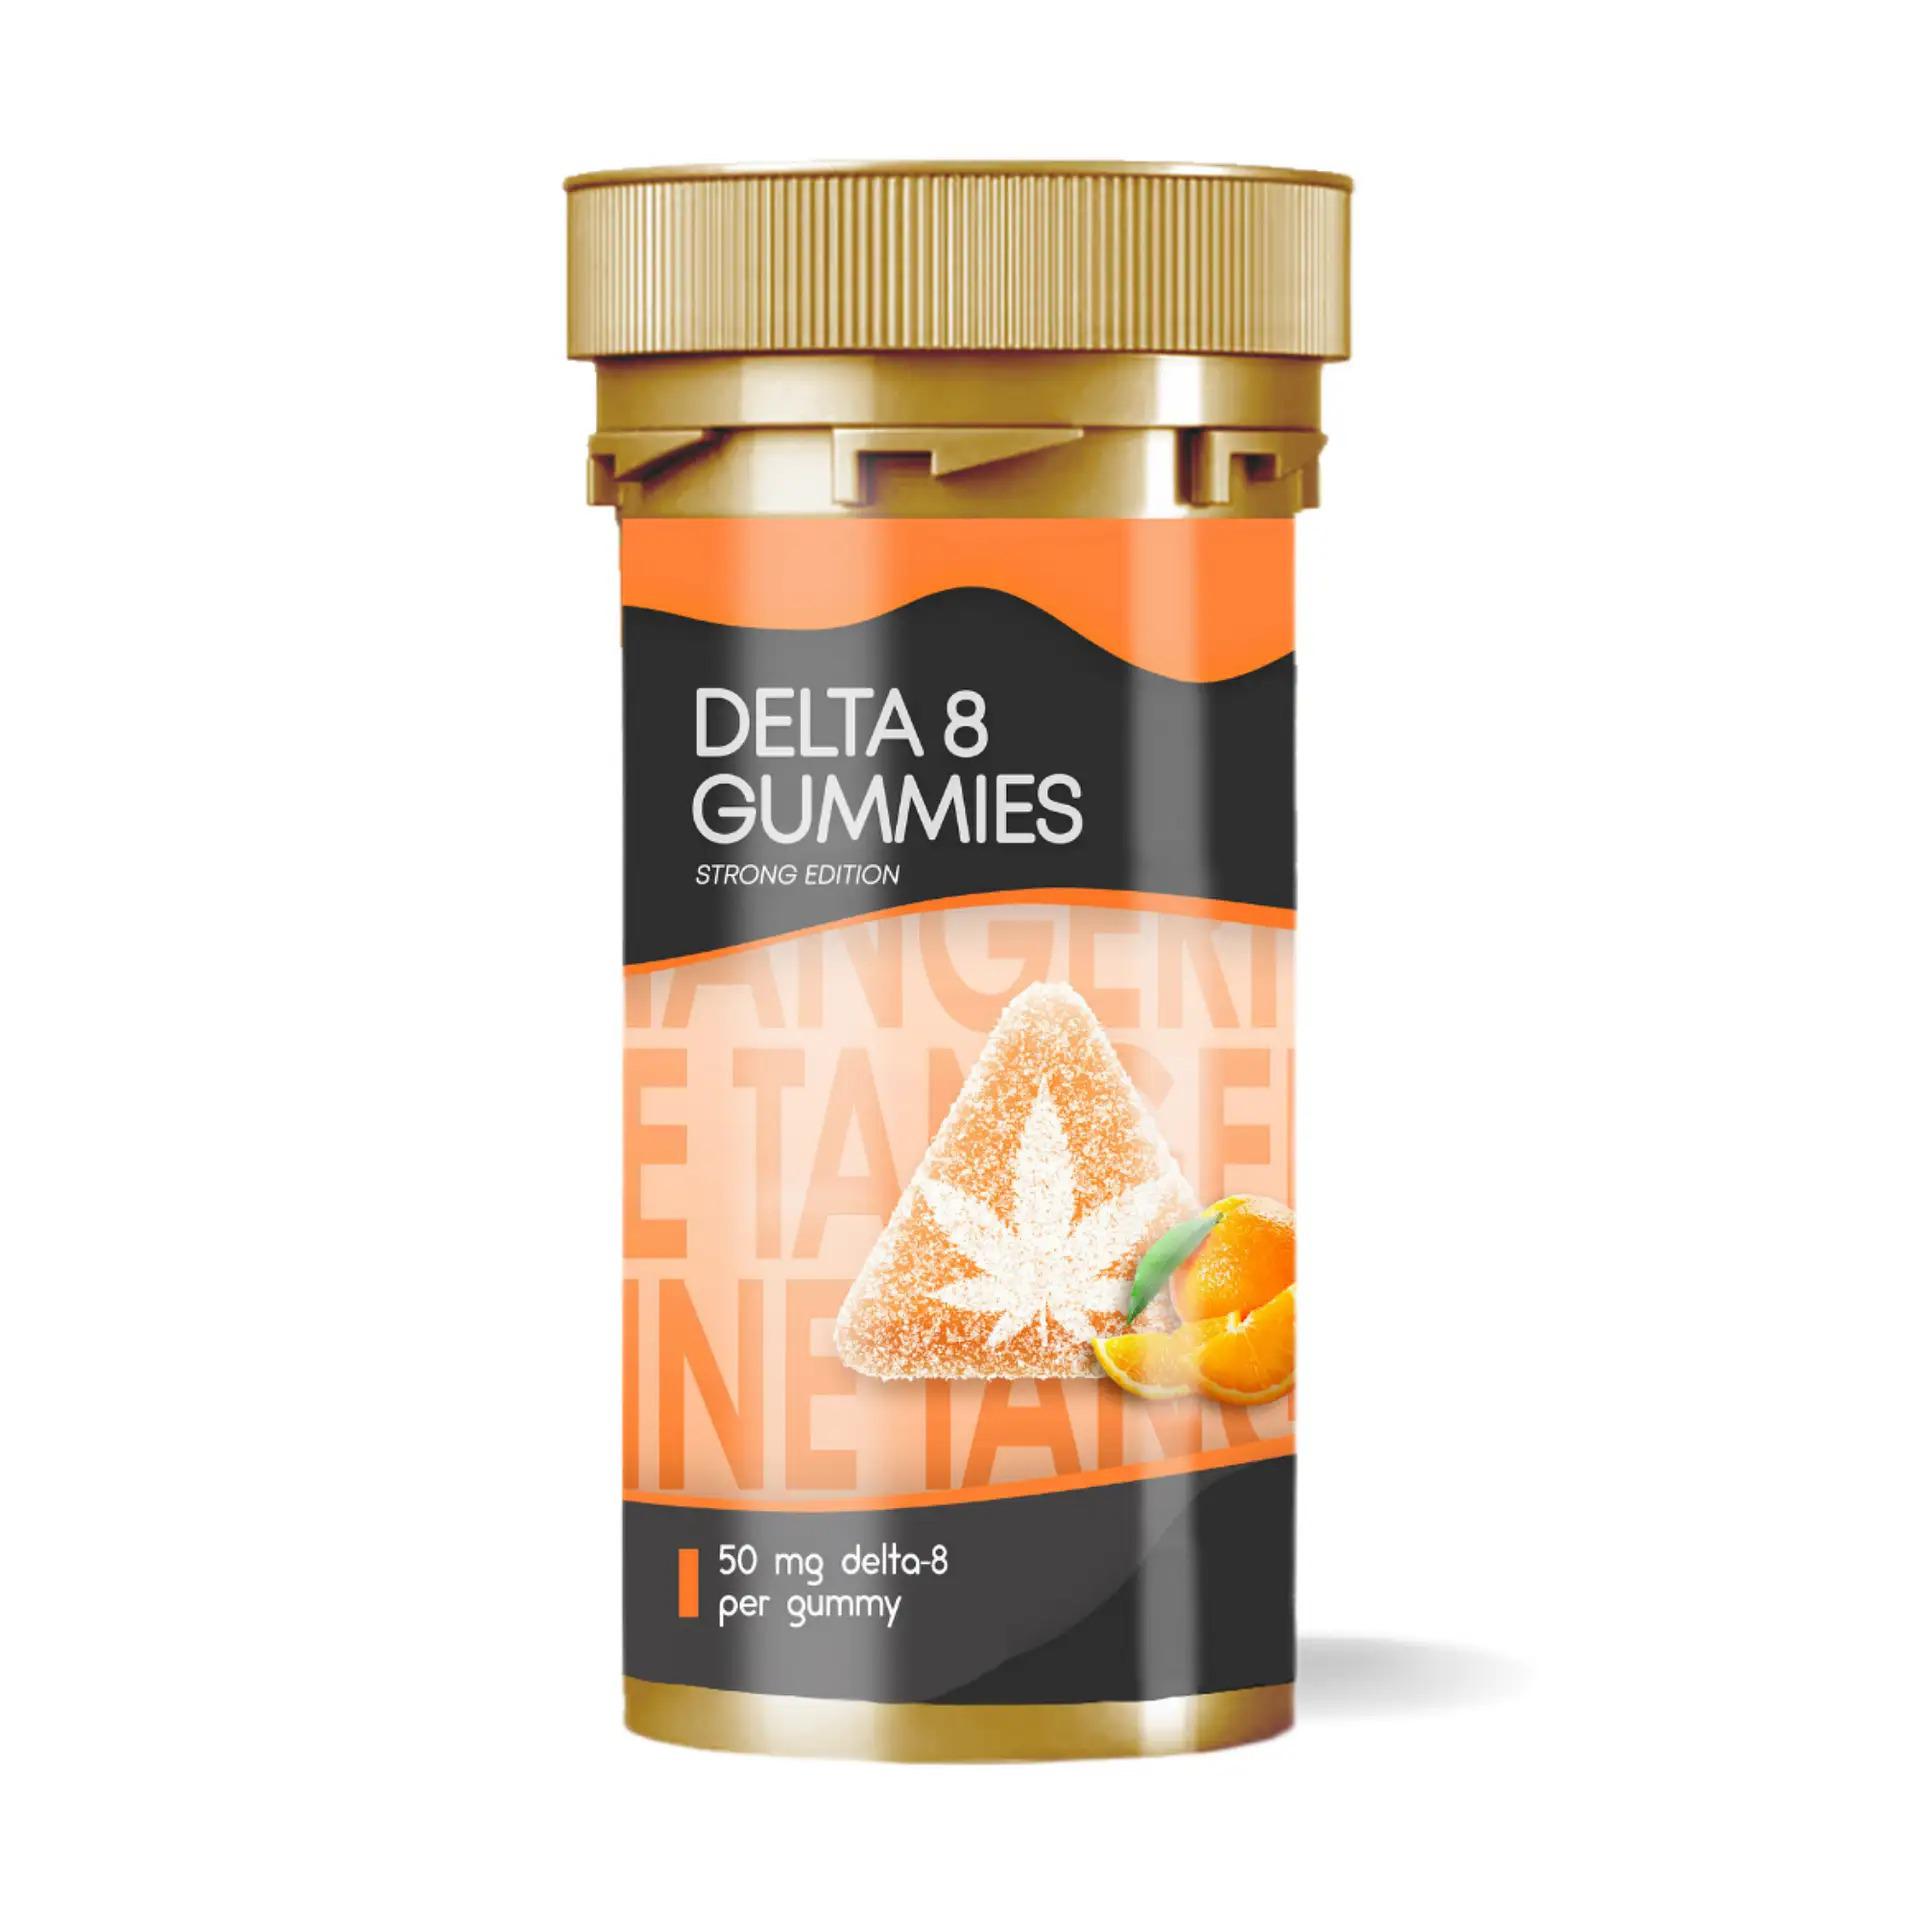 Our Hemp and Tea Co. Delta 8 50mg gummies now come in three new flavors! Delicious and euphoric, these D8 gummies have been reported to promote rest and relaxation, and are used by some to reduce anxiety.